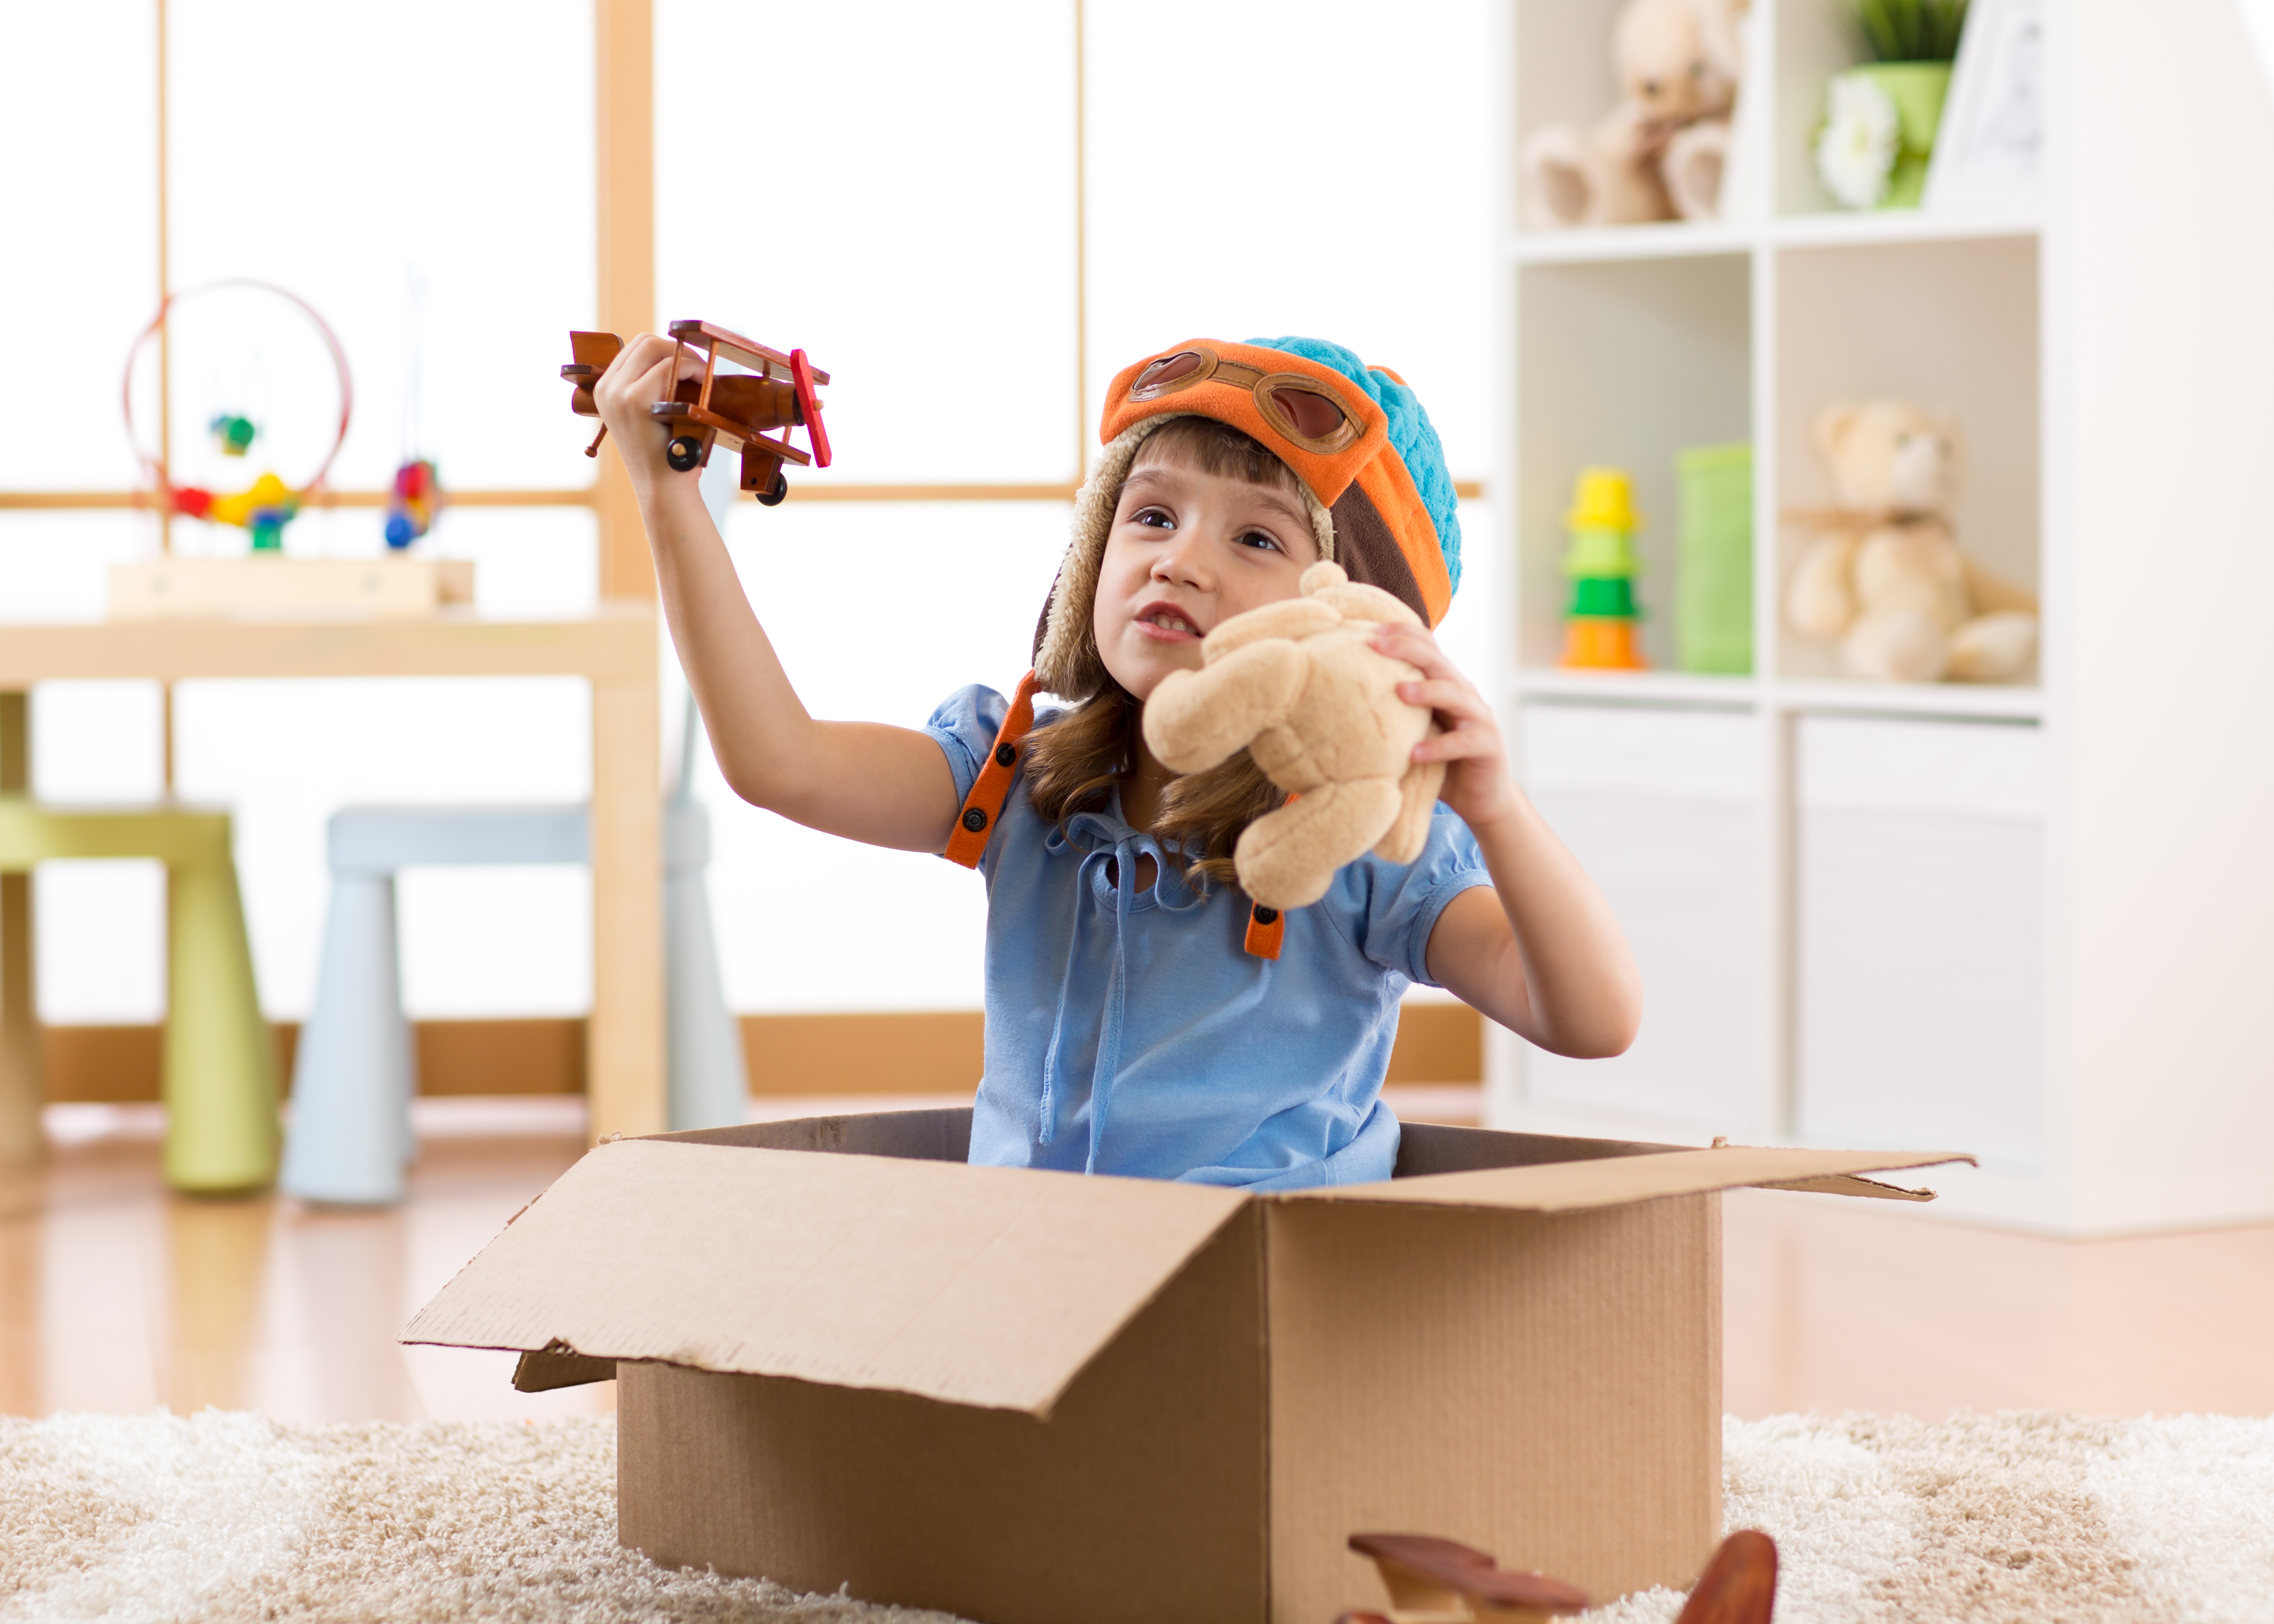 Young girl in a cardboard box playing with a stuffed animal and a toy airplane